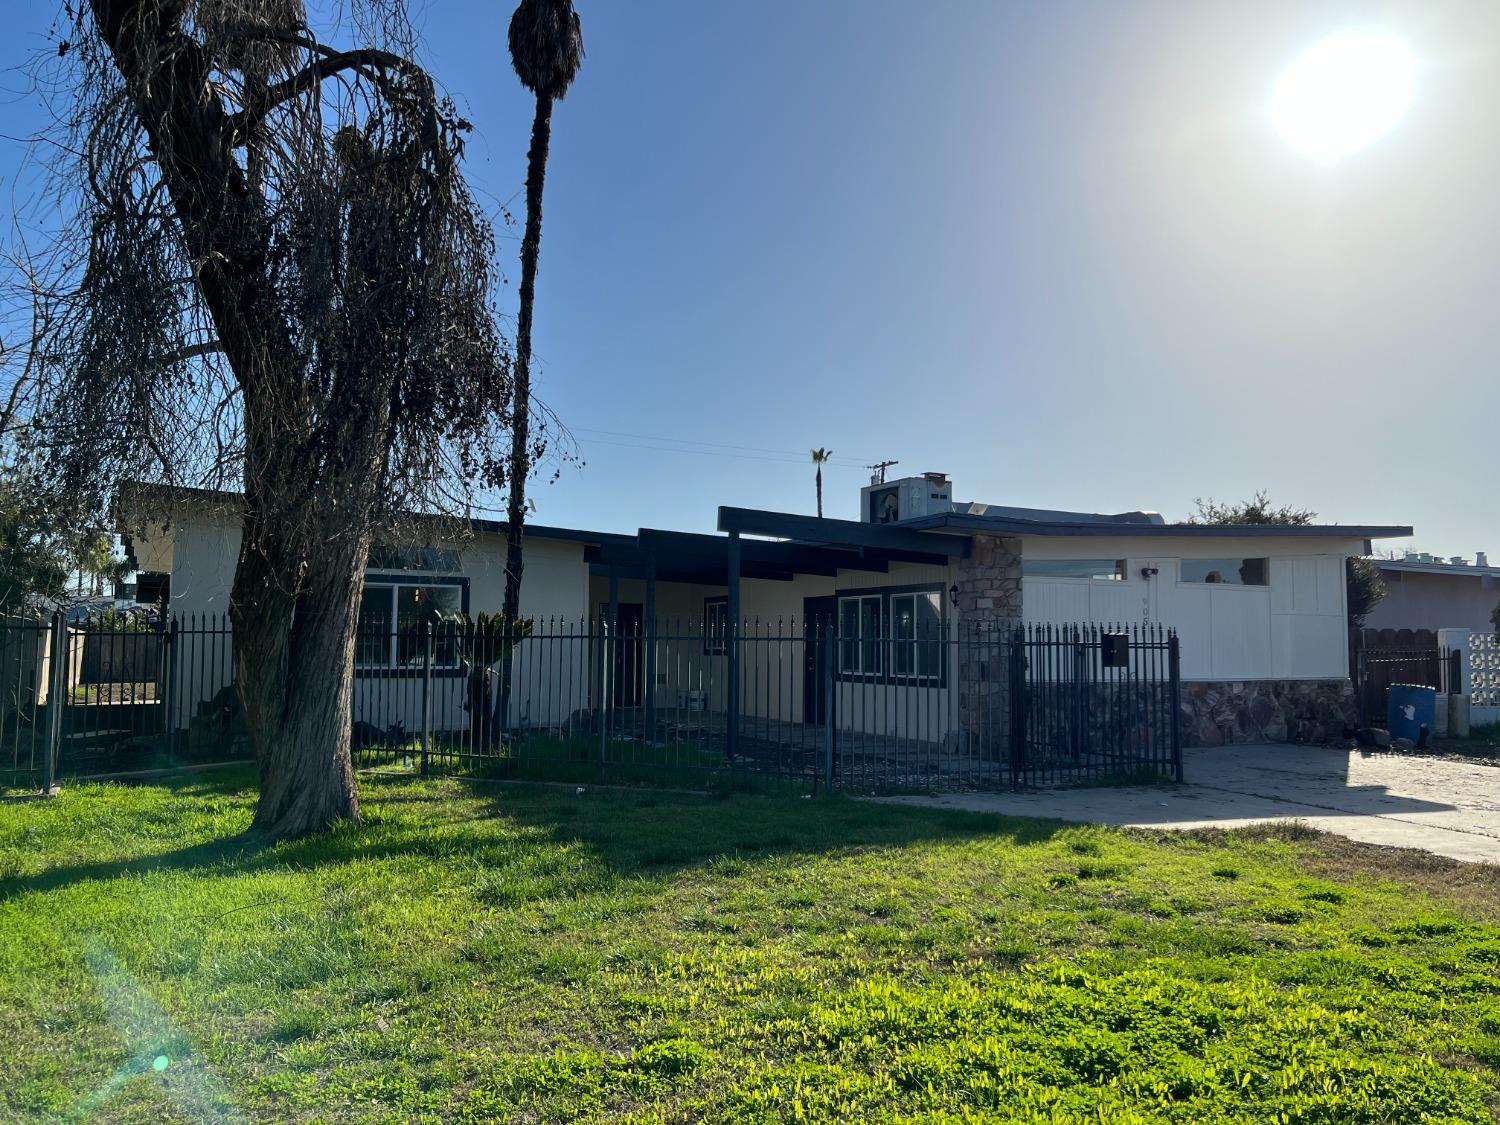 Photo of 905 E Myrtle St in Hanford, CA